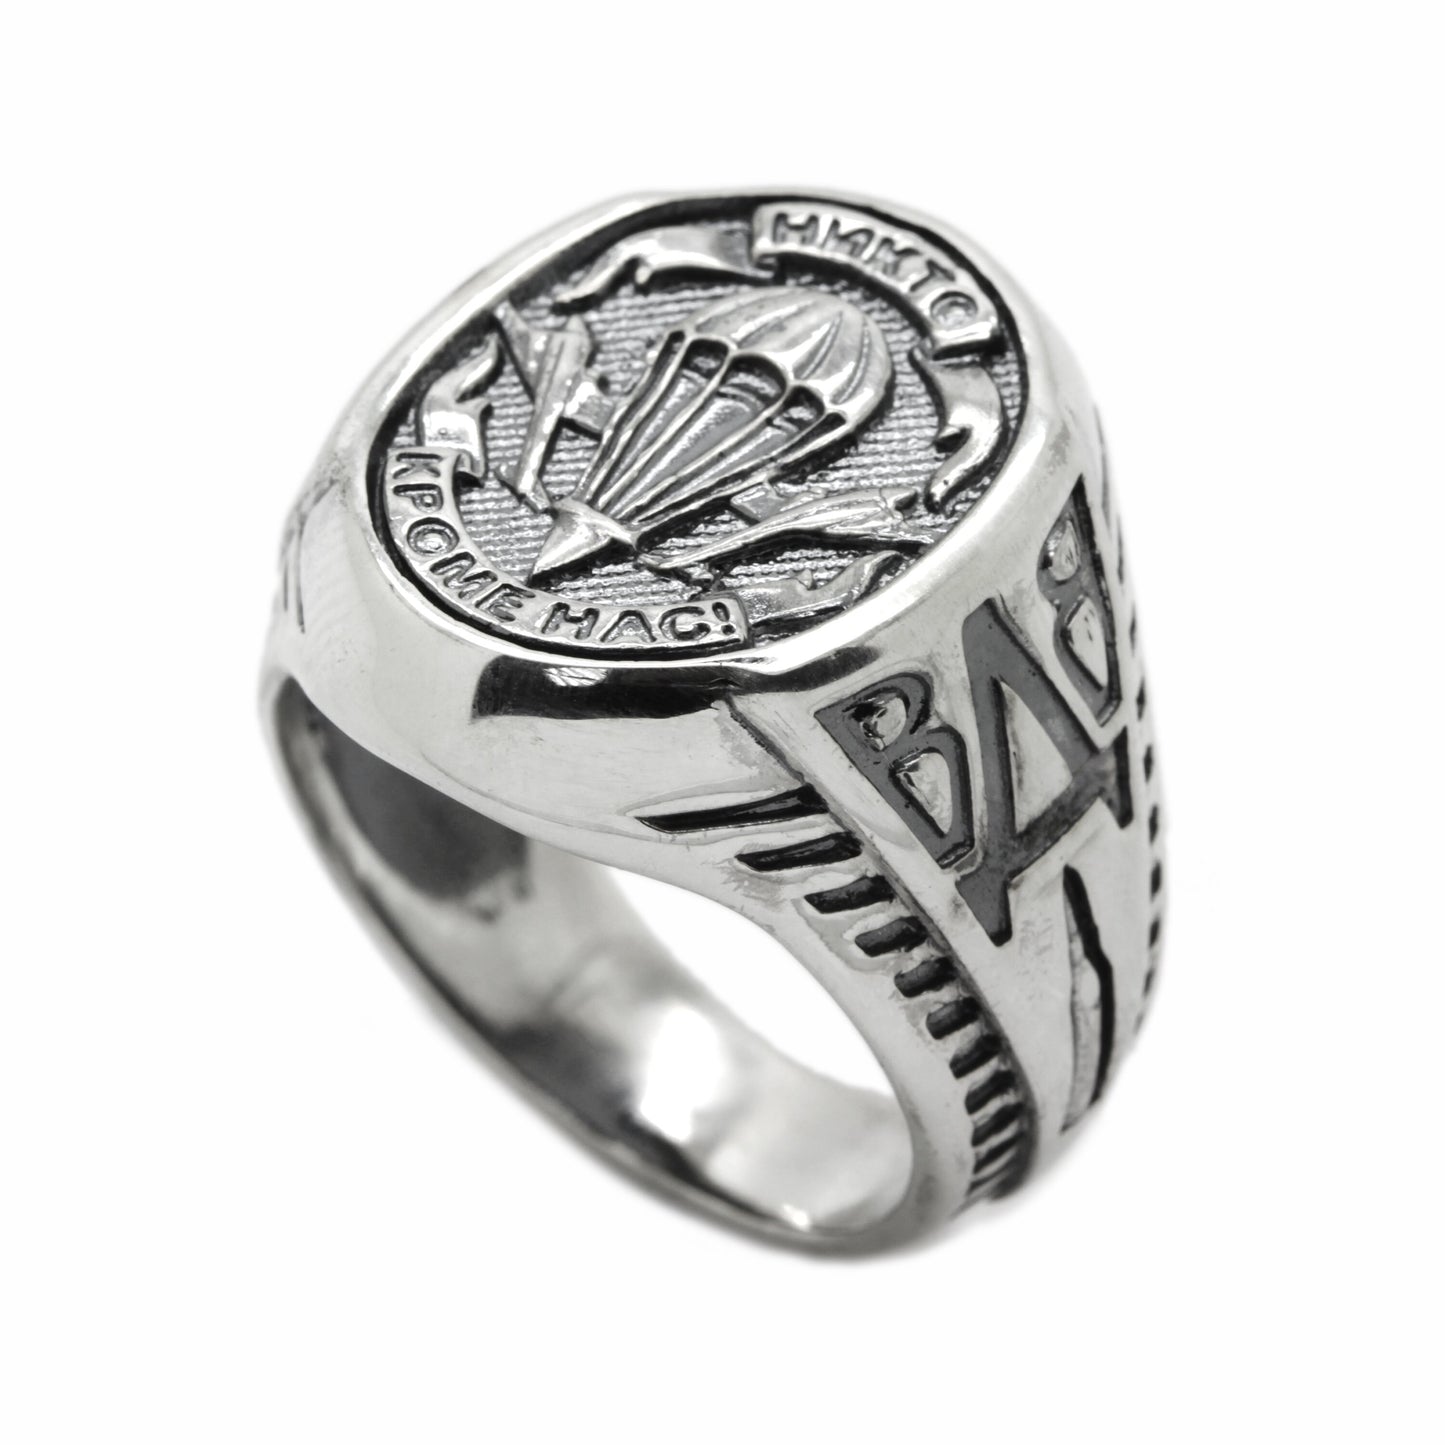 Airborne Forces of USSR, Soviet Union Navy, Mens Silver Signet Ring